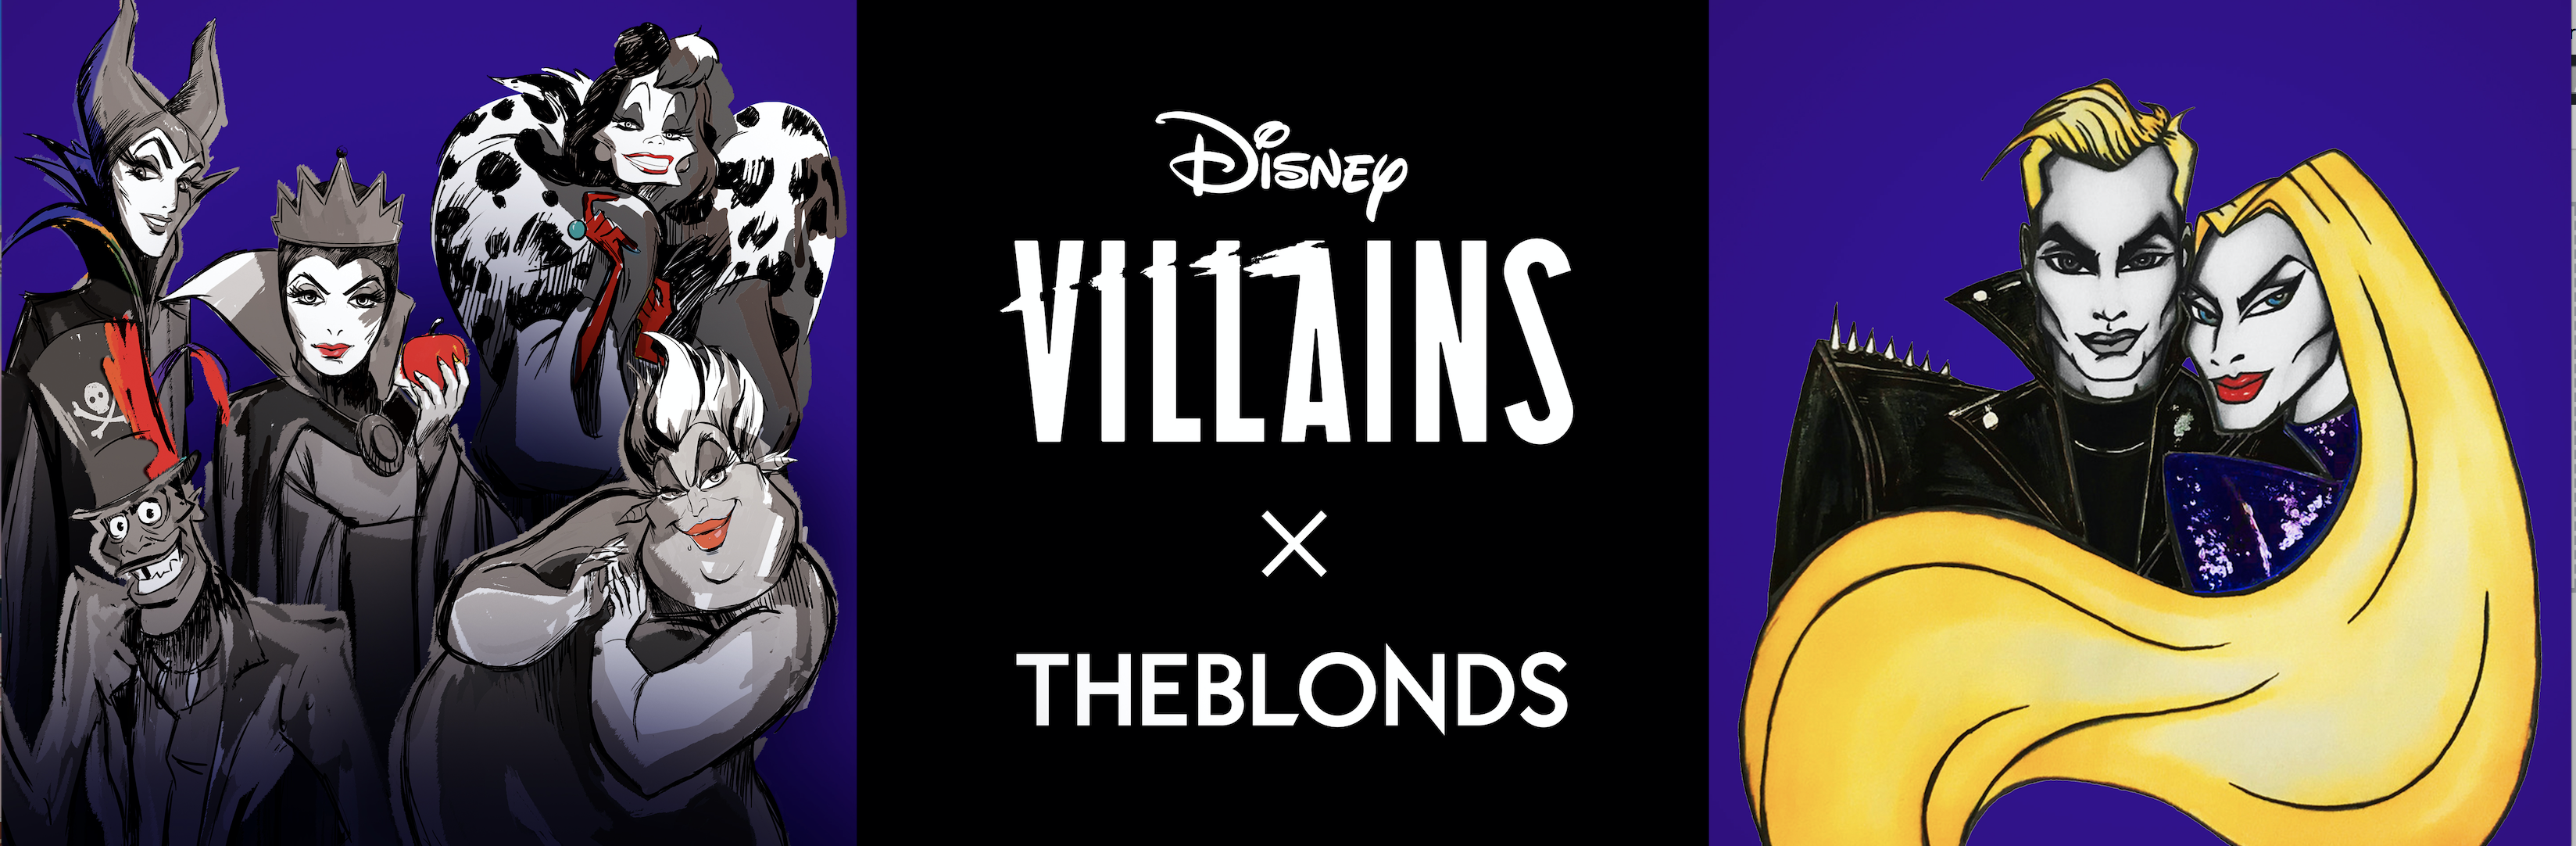 DISNEY AND THE BLONDS TO PRESENT ‘DISNEY VILLAINS’ FASHION SHOW DURING NEW YORK FASHION WEEK